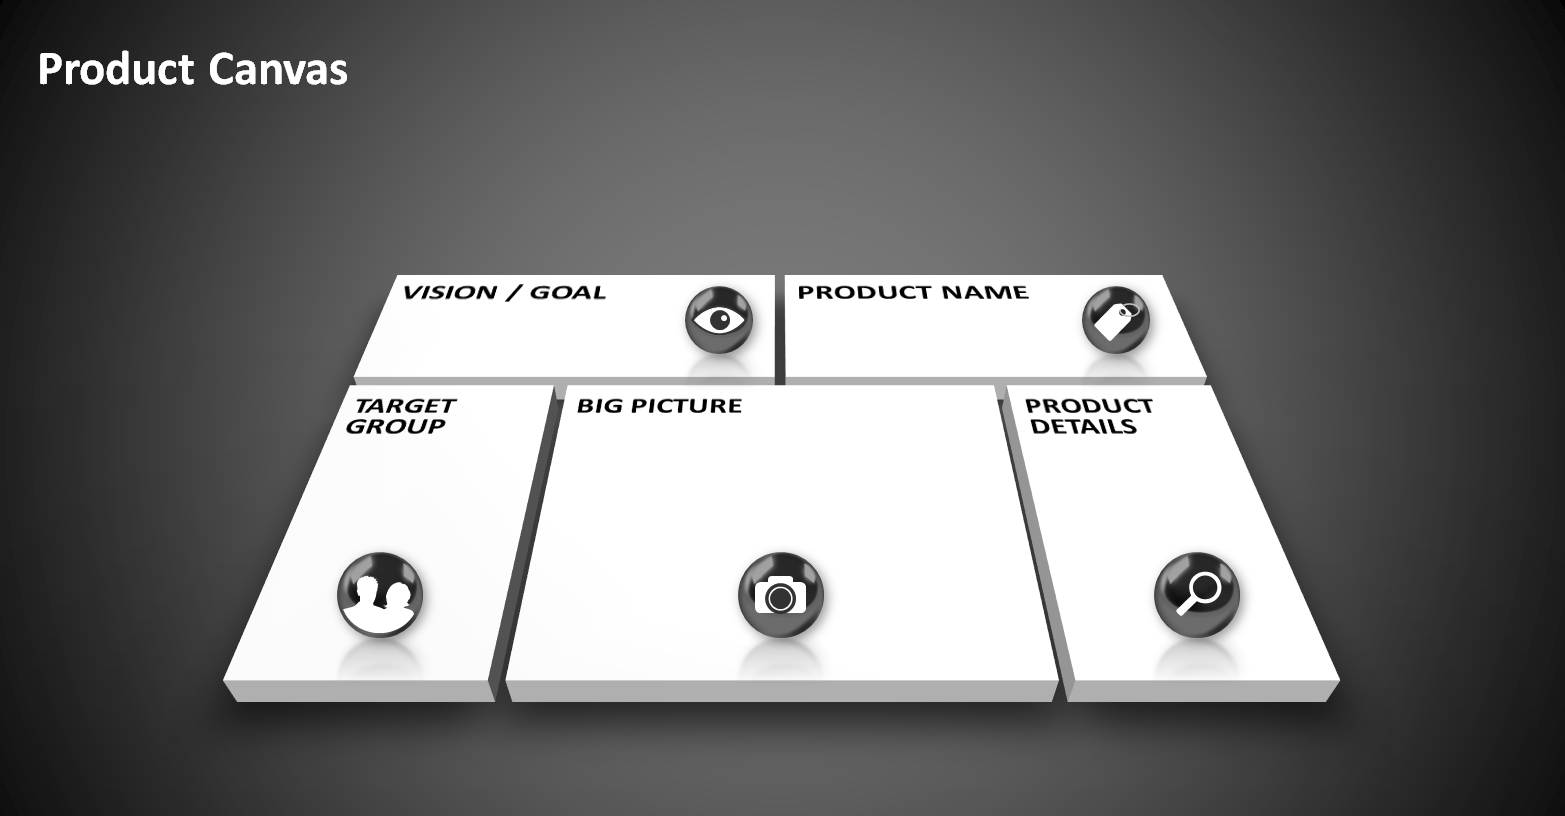  The Salient Product Canvas